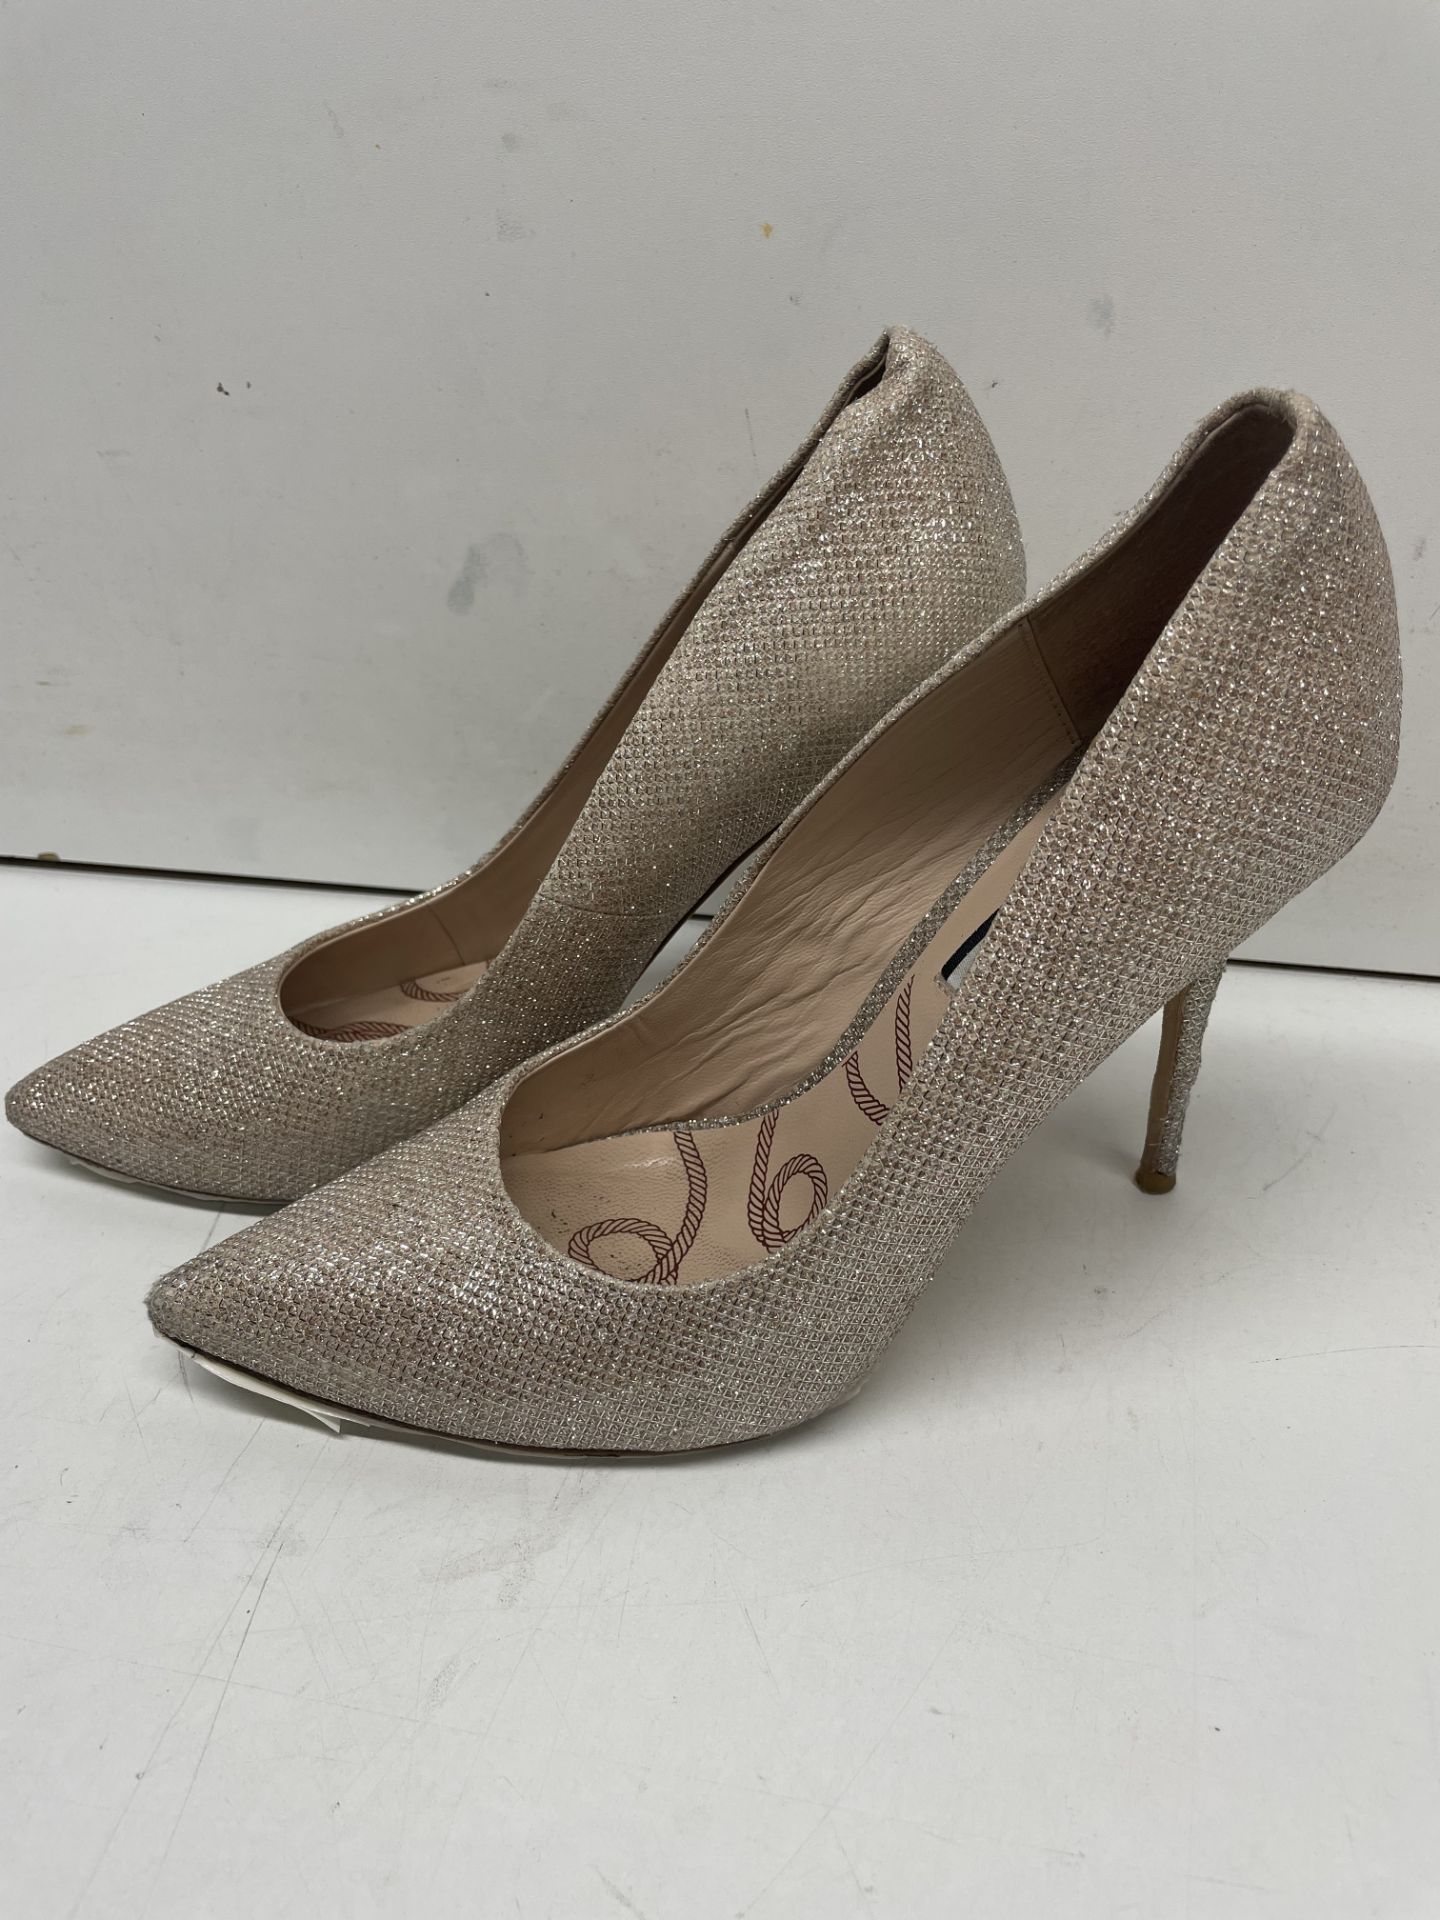 Ex-Display Lucy Choi High Heel Court Shoes | Eur 40 - Image 2 of 7